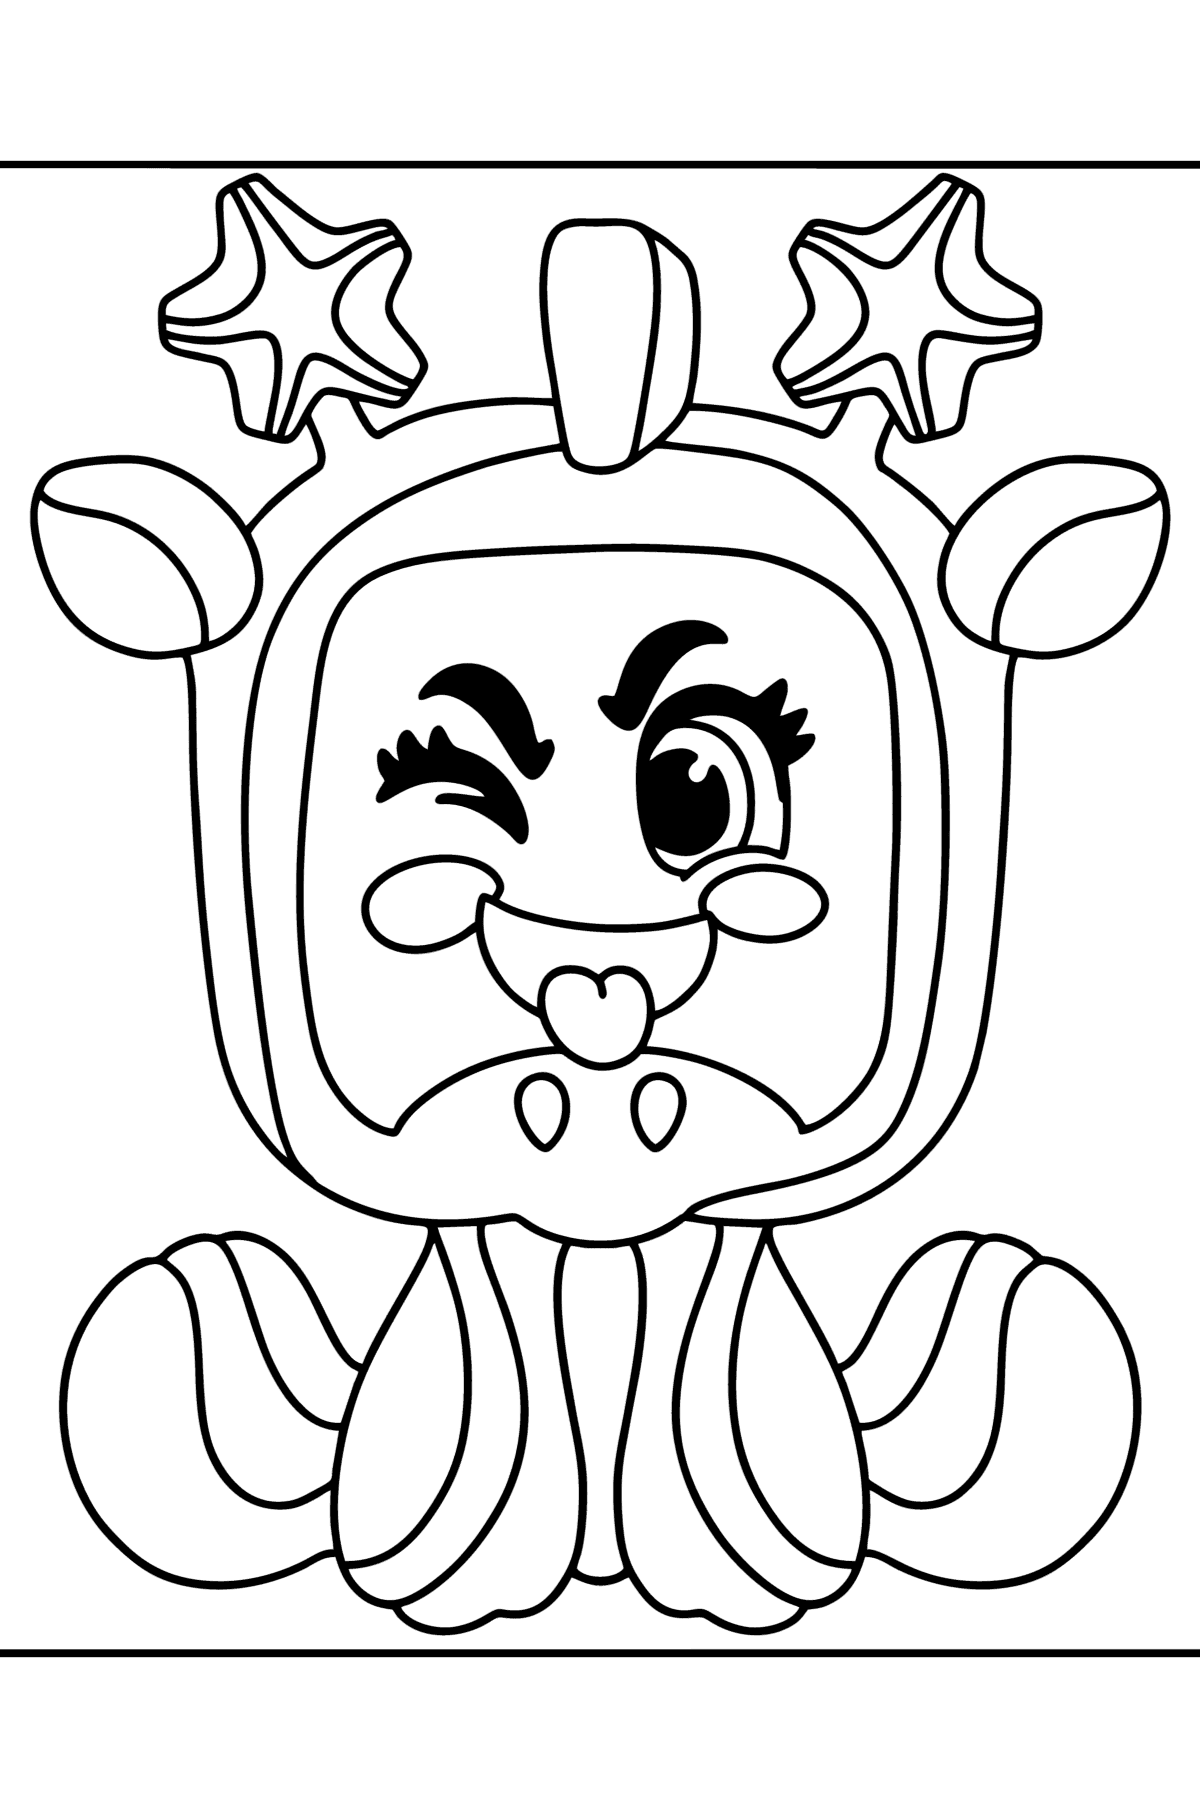 Coloring page MojiPops Rafe - Coloring Pages for Kids